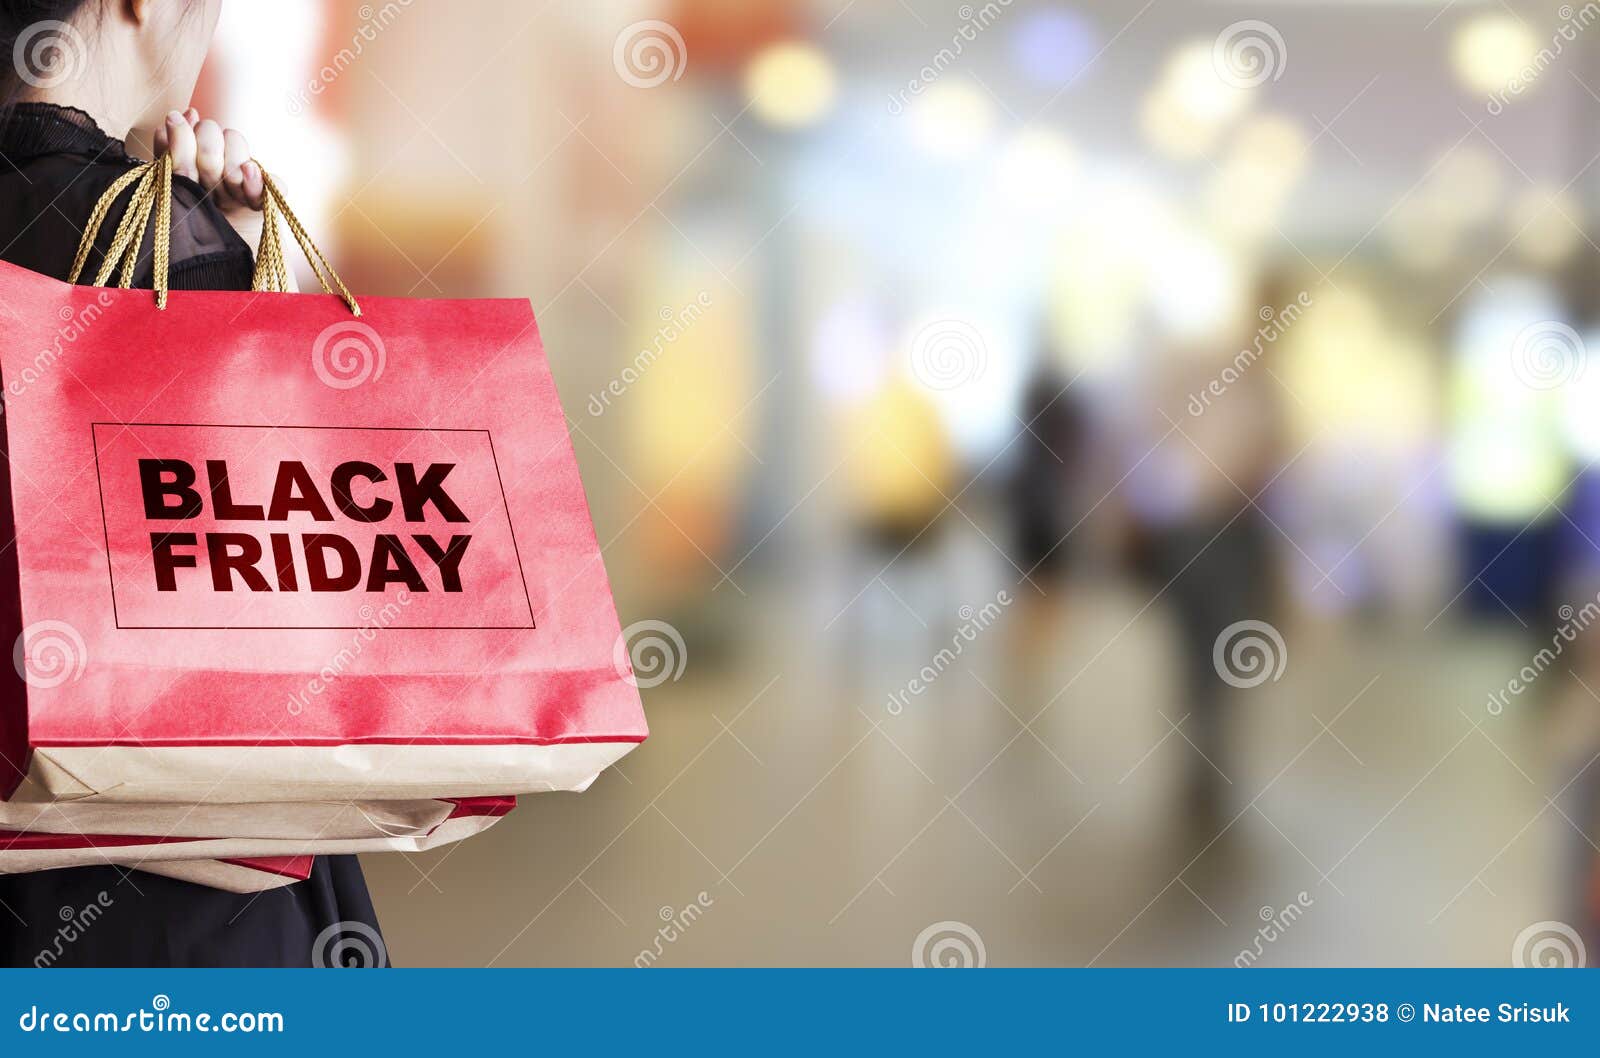 Young Woman Holding Black Friday Shopping Bag Stock Photo - Image of ...